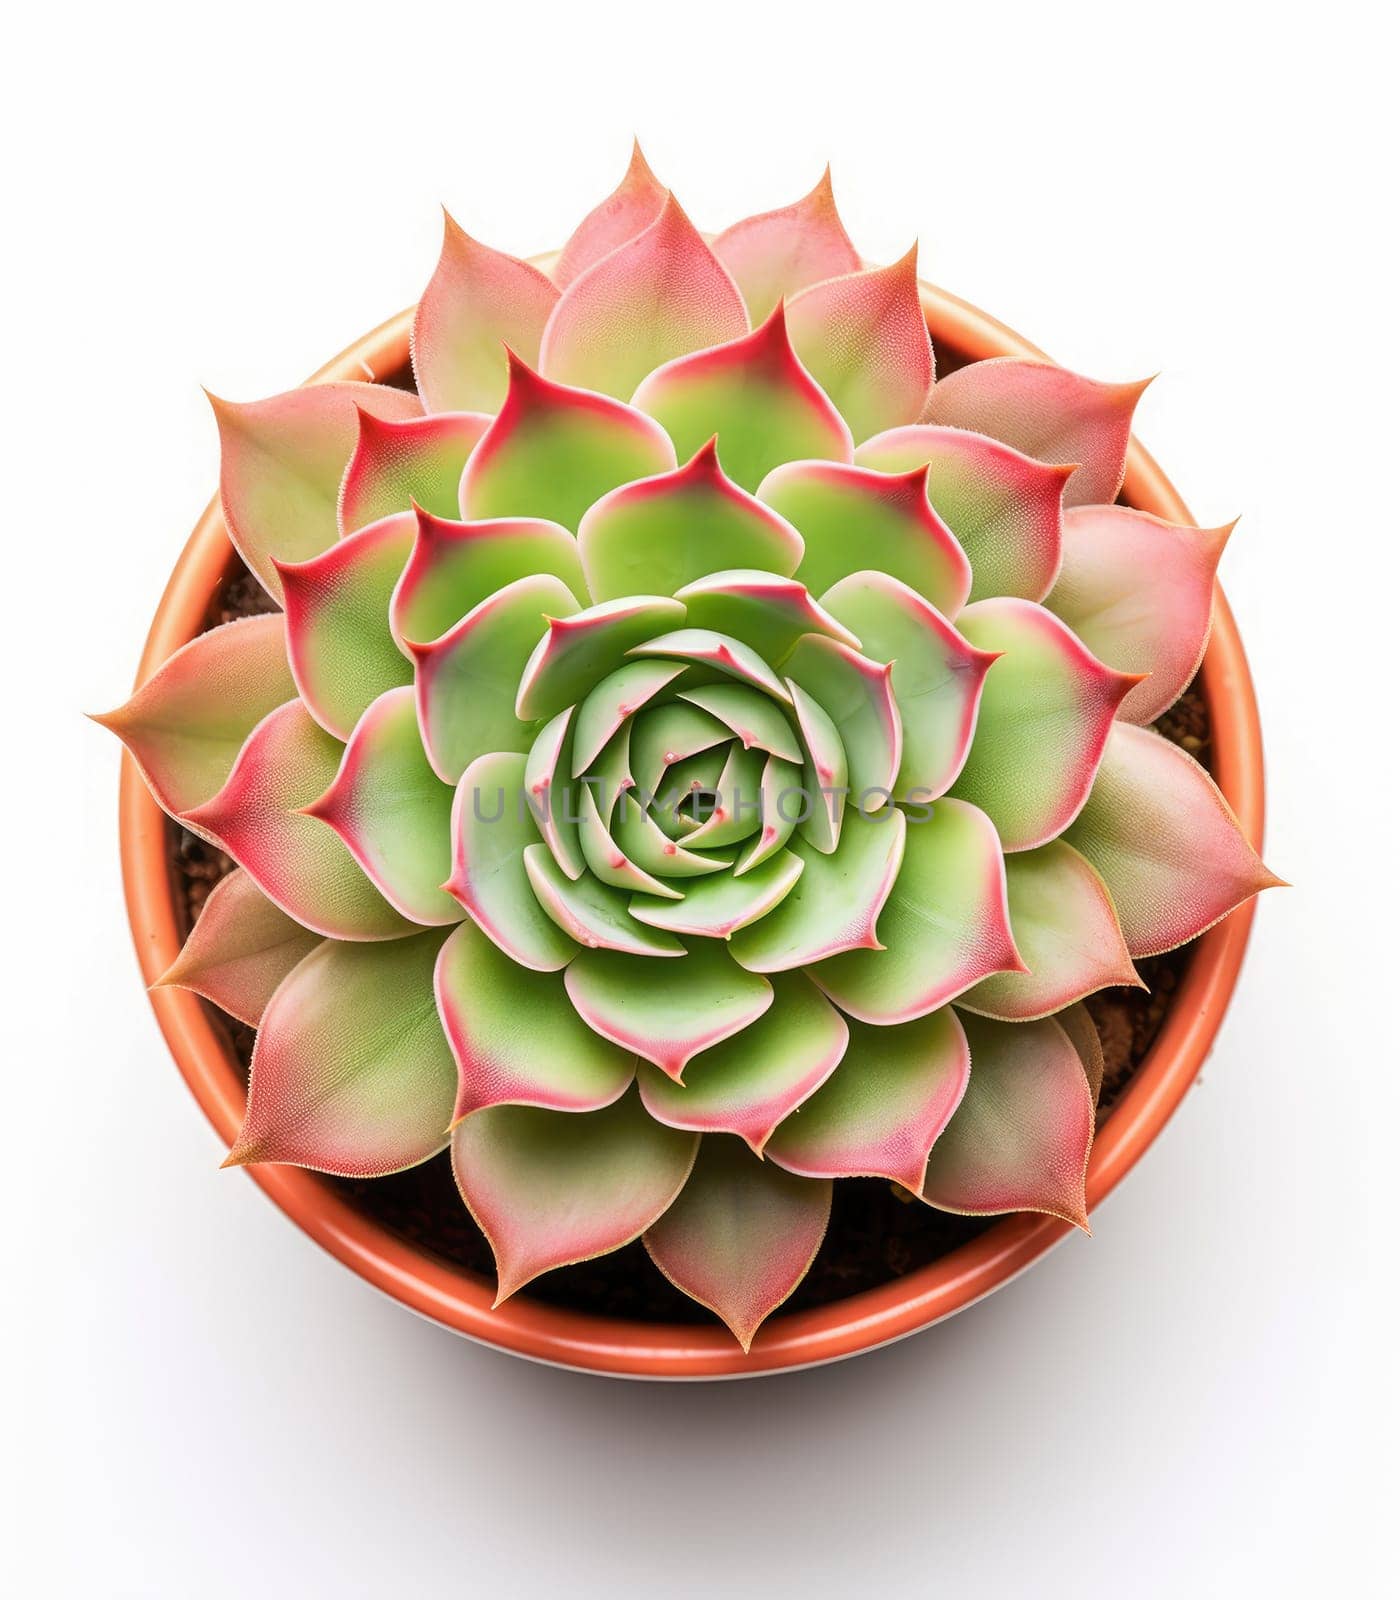 Juicy Echeveria Agawood pot plant isolated on white background, in ceramic pot